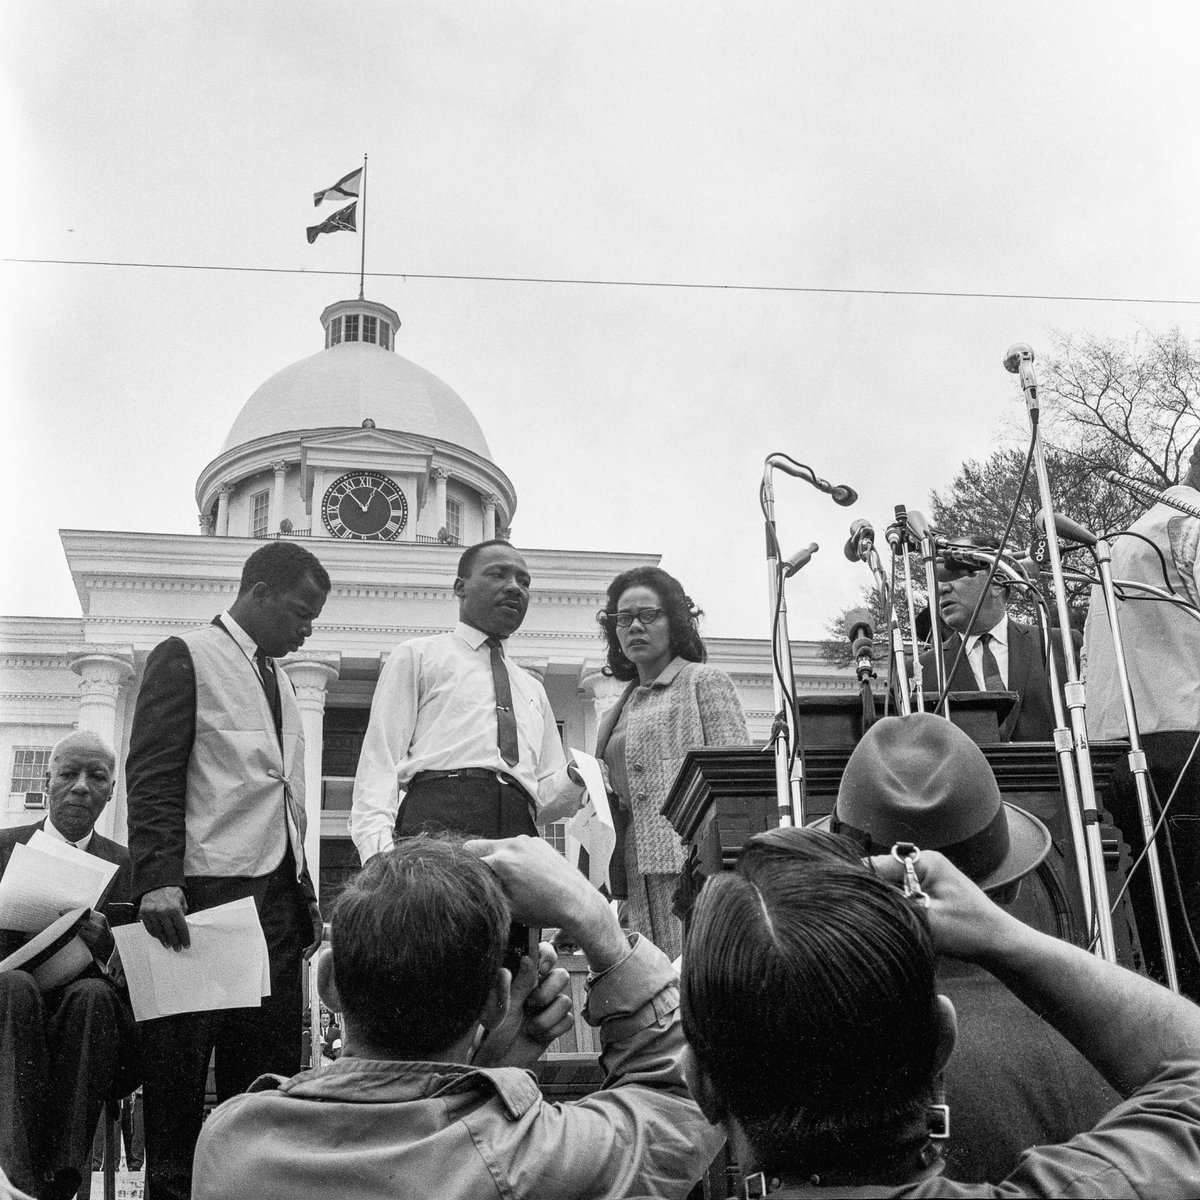 John Lewis, Martin Luther King Jr. and Coretta Scott King at rally on the steps of the Alabama State Capitol on March 25, 1965. Photo by Charles Shaw.  #GoodTrouble  #JohnLewisRIP